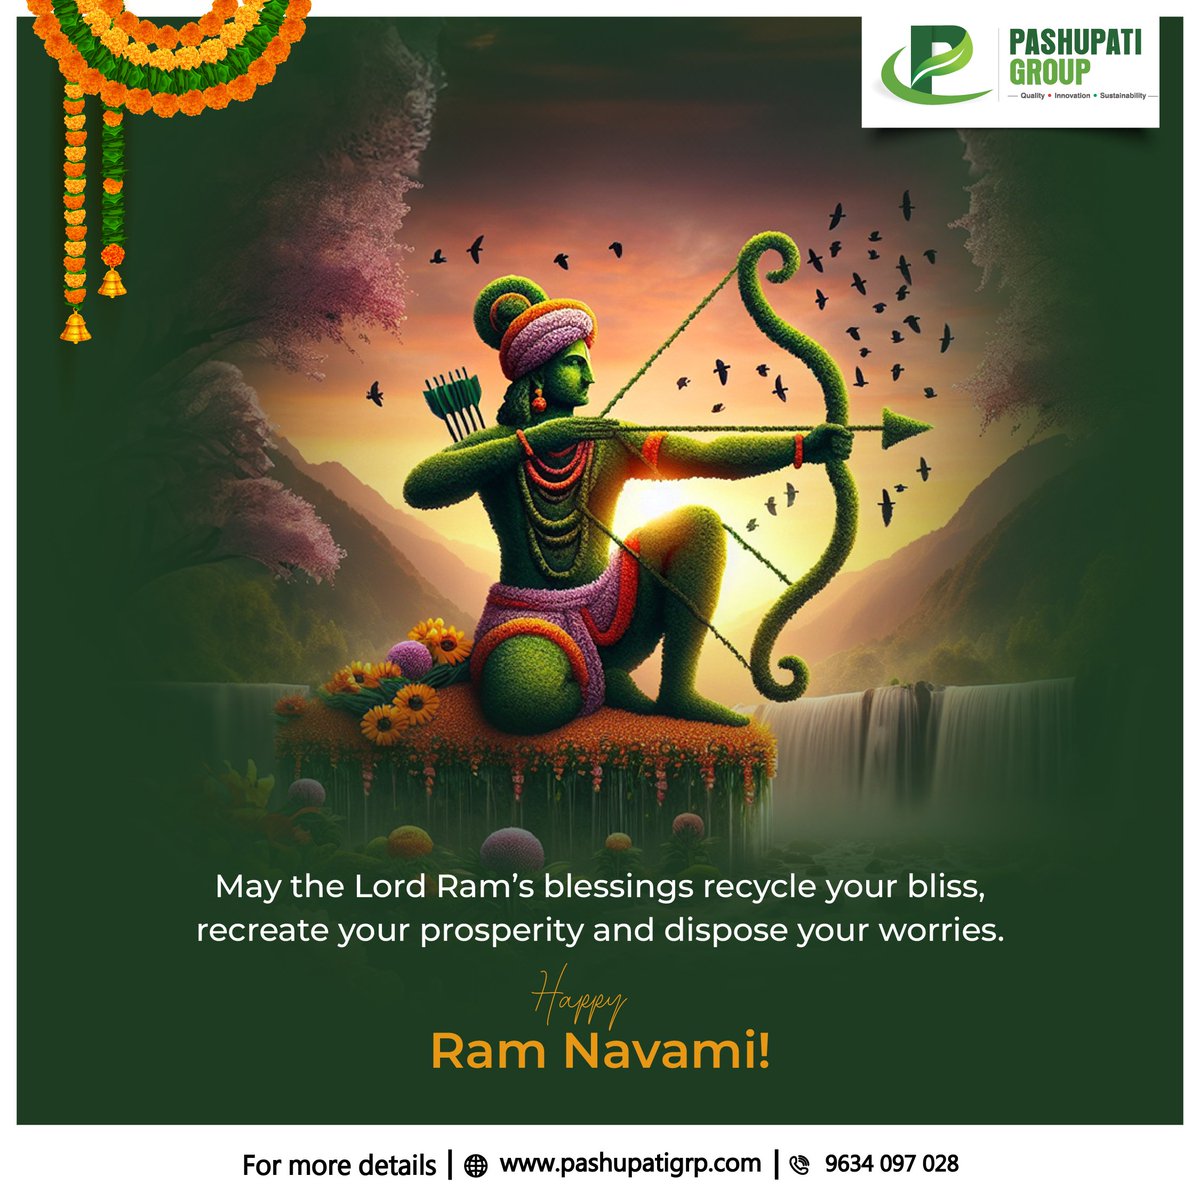 May Lord Ram's blessings shower you with joy and prosperity. As we celebrate, let's also honor the spirit of a greener tomorrow. Wishing you a blessed and joyous Ram Navami!

#ramnavami2024 #navratri #rammandirayodhya #pashupatigroup #sustainability #Plasticwasterecycling